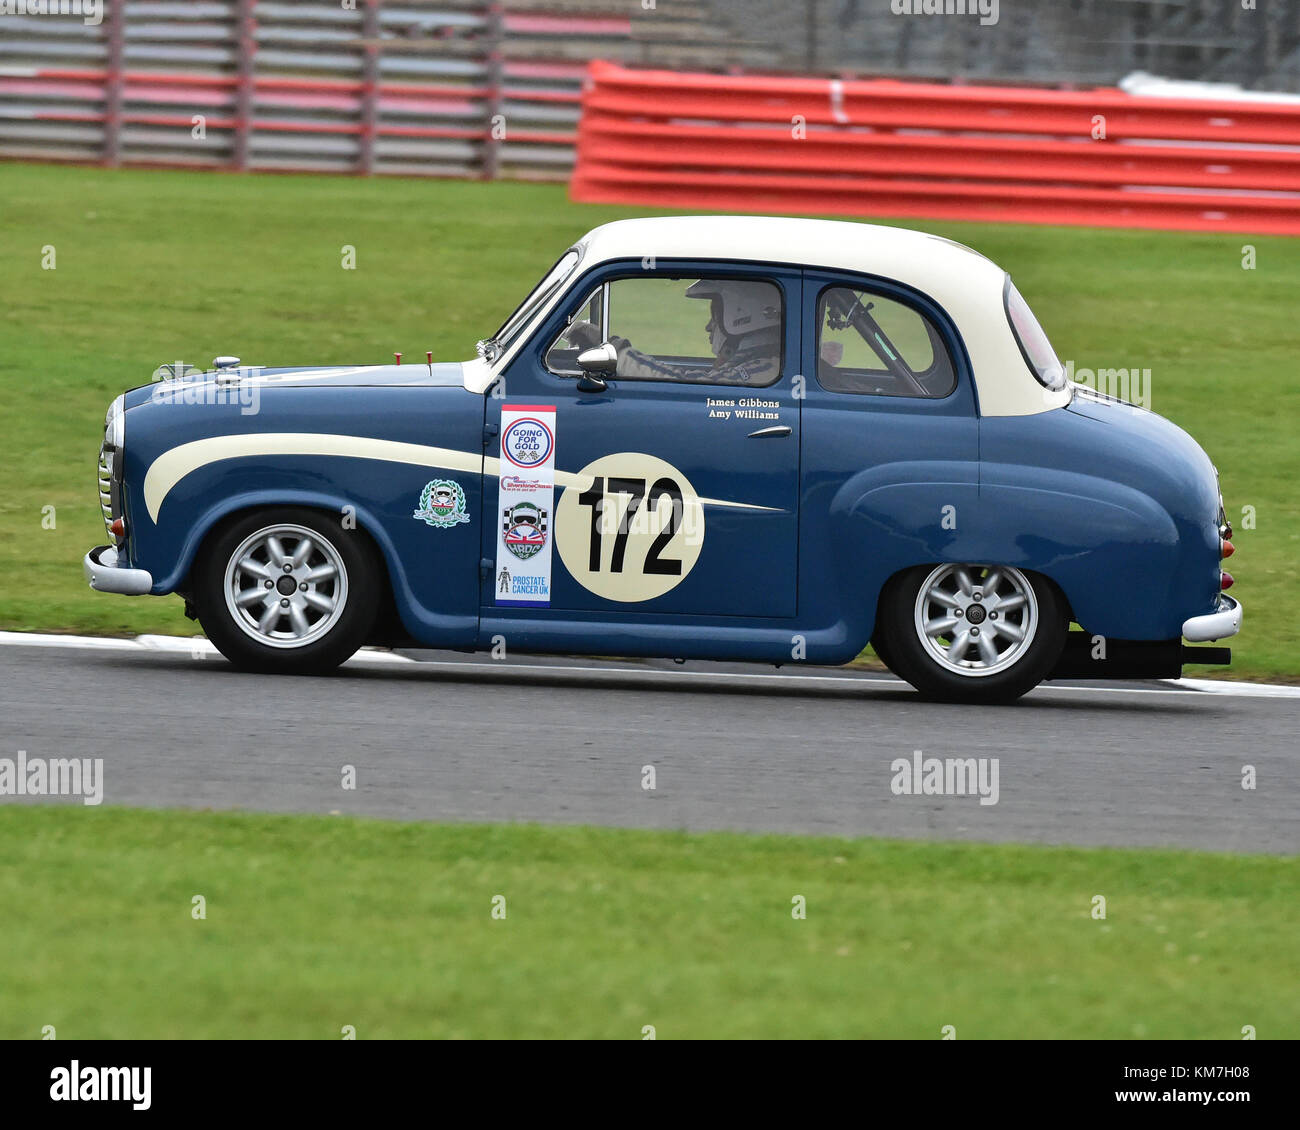 Amy Williams, James Gibbons, Austin A35 Academy, Silverstone Classic Celebrity Challenge Trophy, Silverstone Classic, July 2017, Silverstone, 60's car Stock Photo